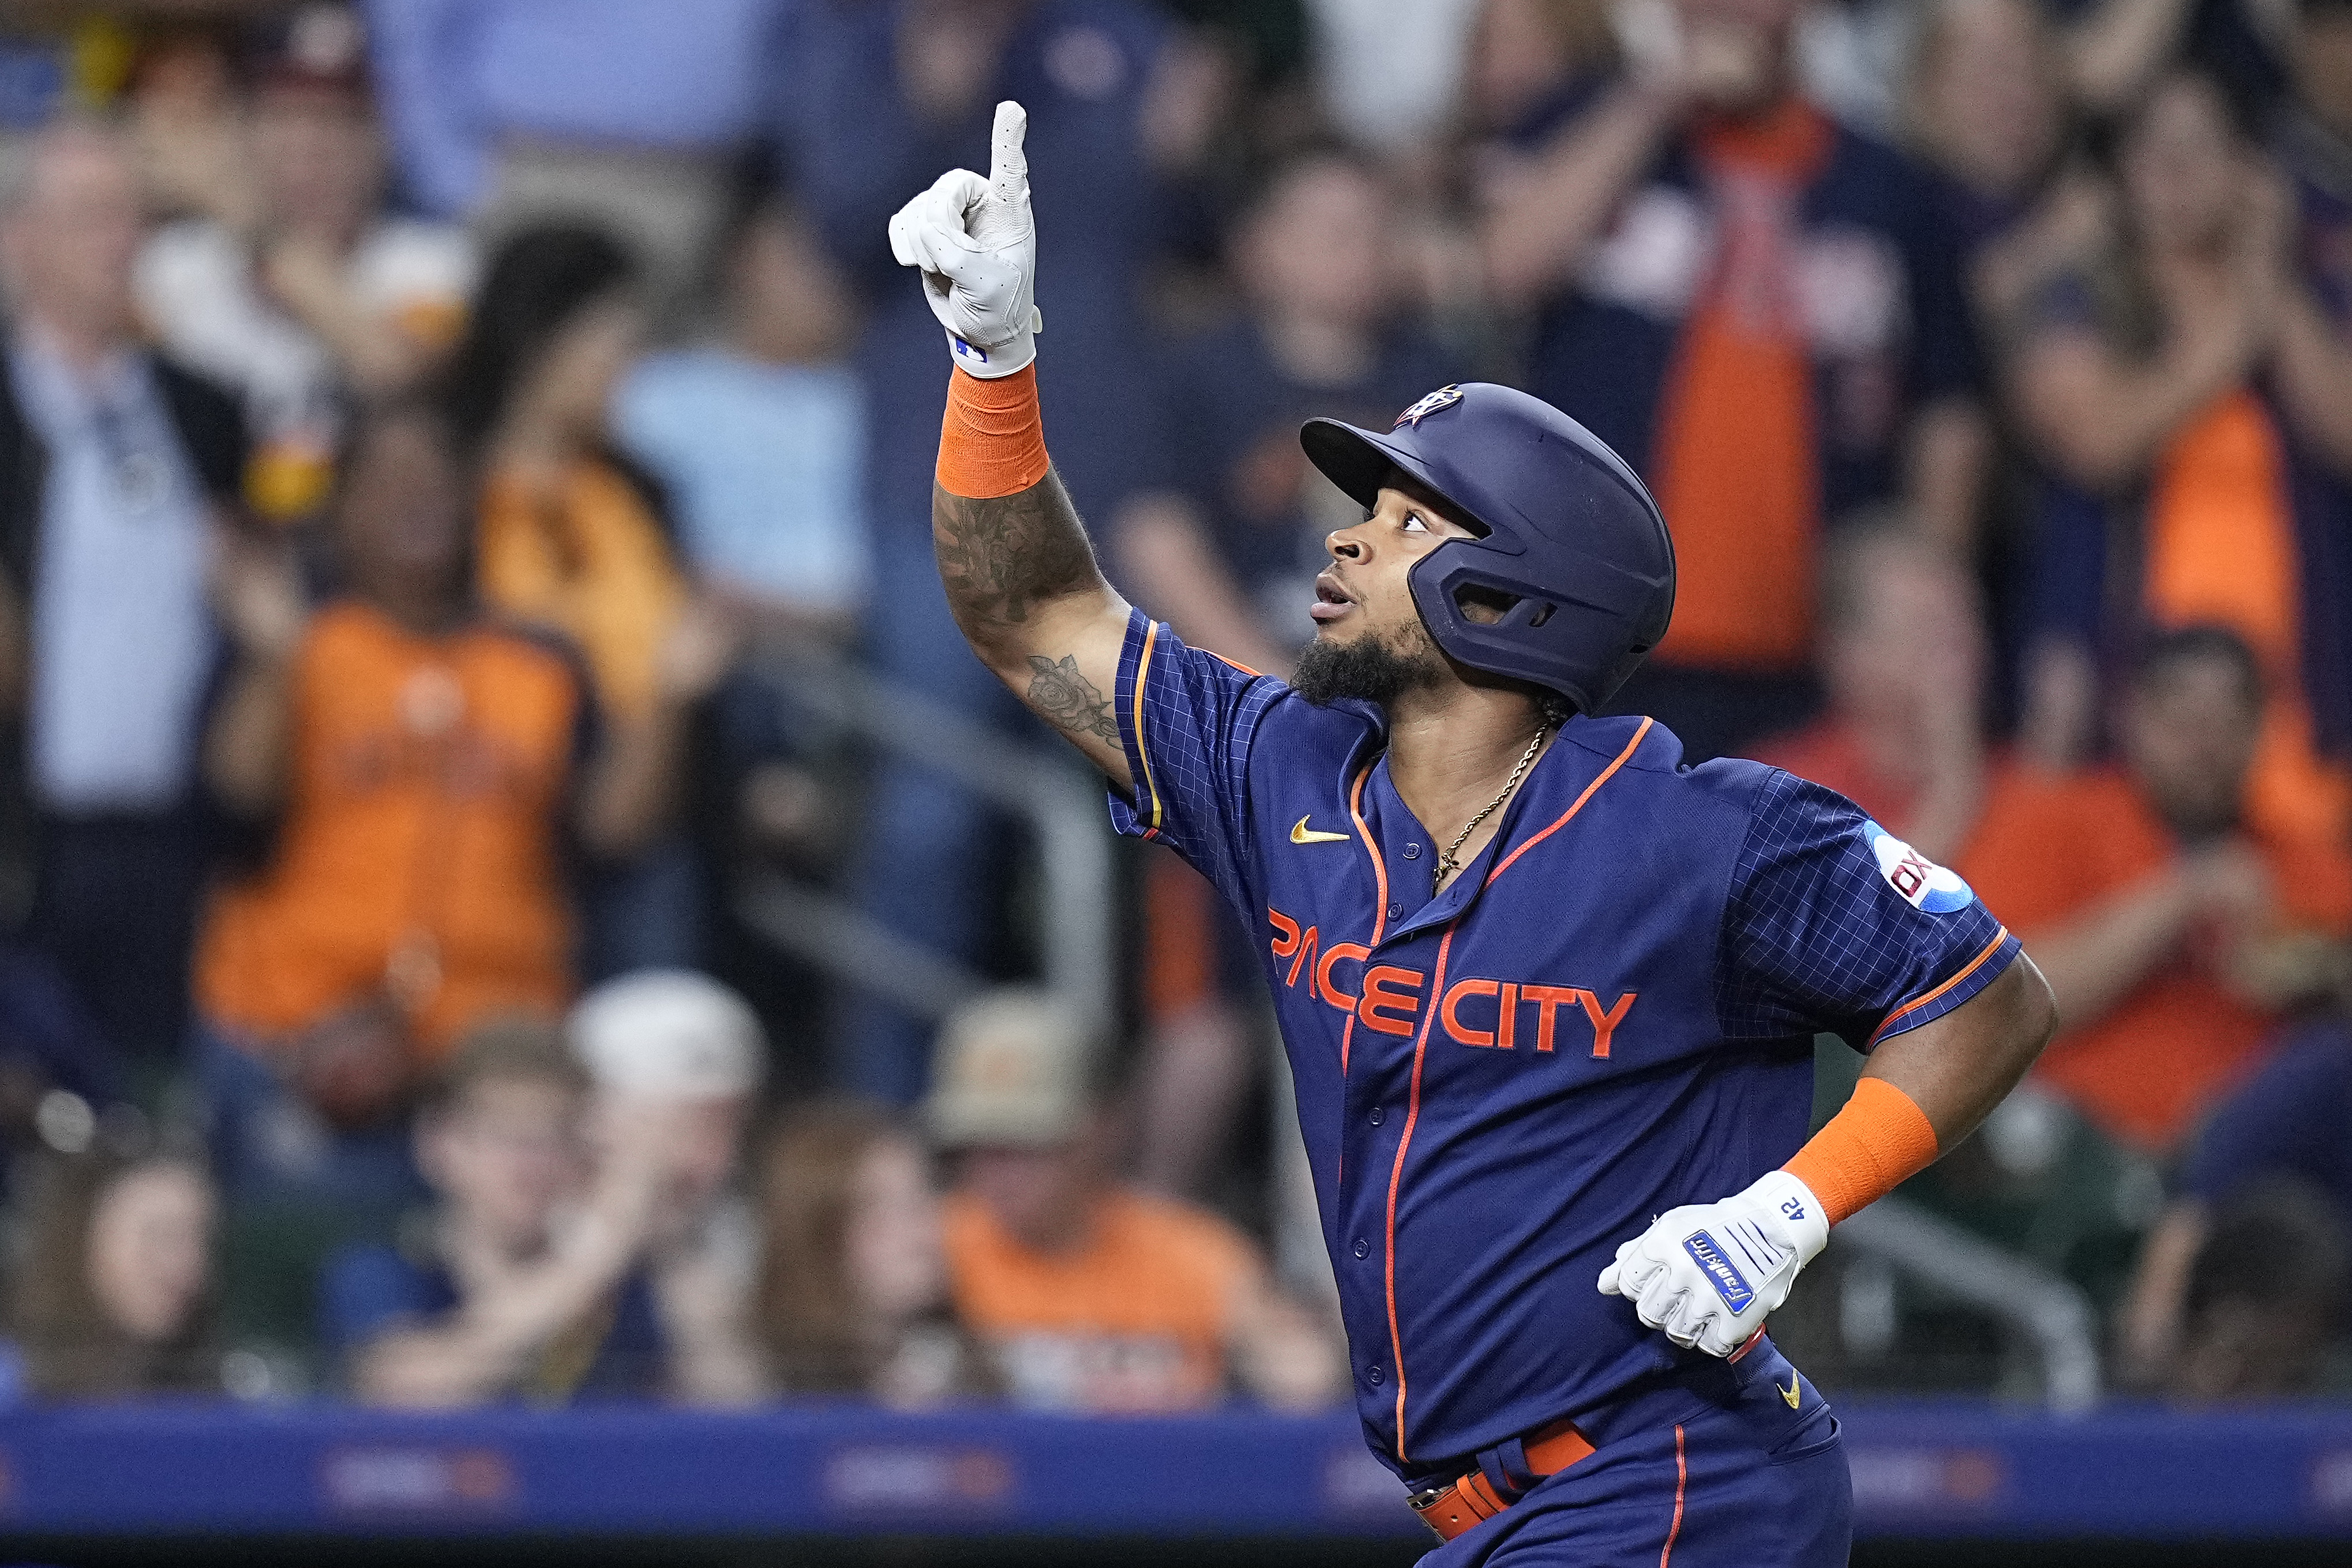 Houston Astros' Corey Julks celebrates after hitting a solo home run during the third inning of a baseball game against the Toronto Blue Jays, Monday, April 17, 2023, in Houston.  (AP Photo/Kevin M. Cox)